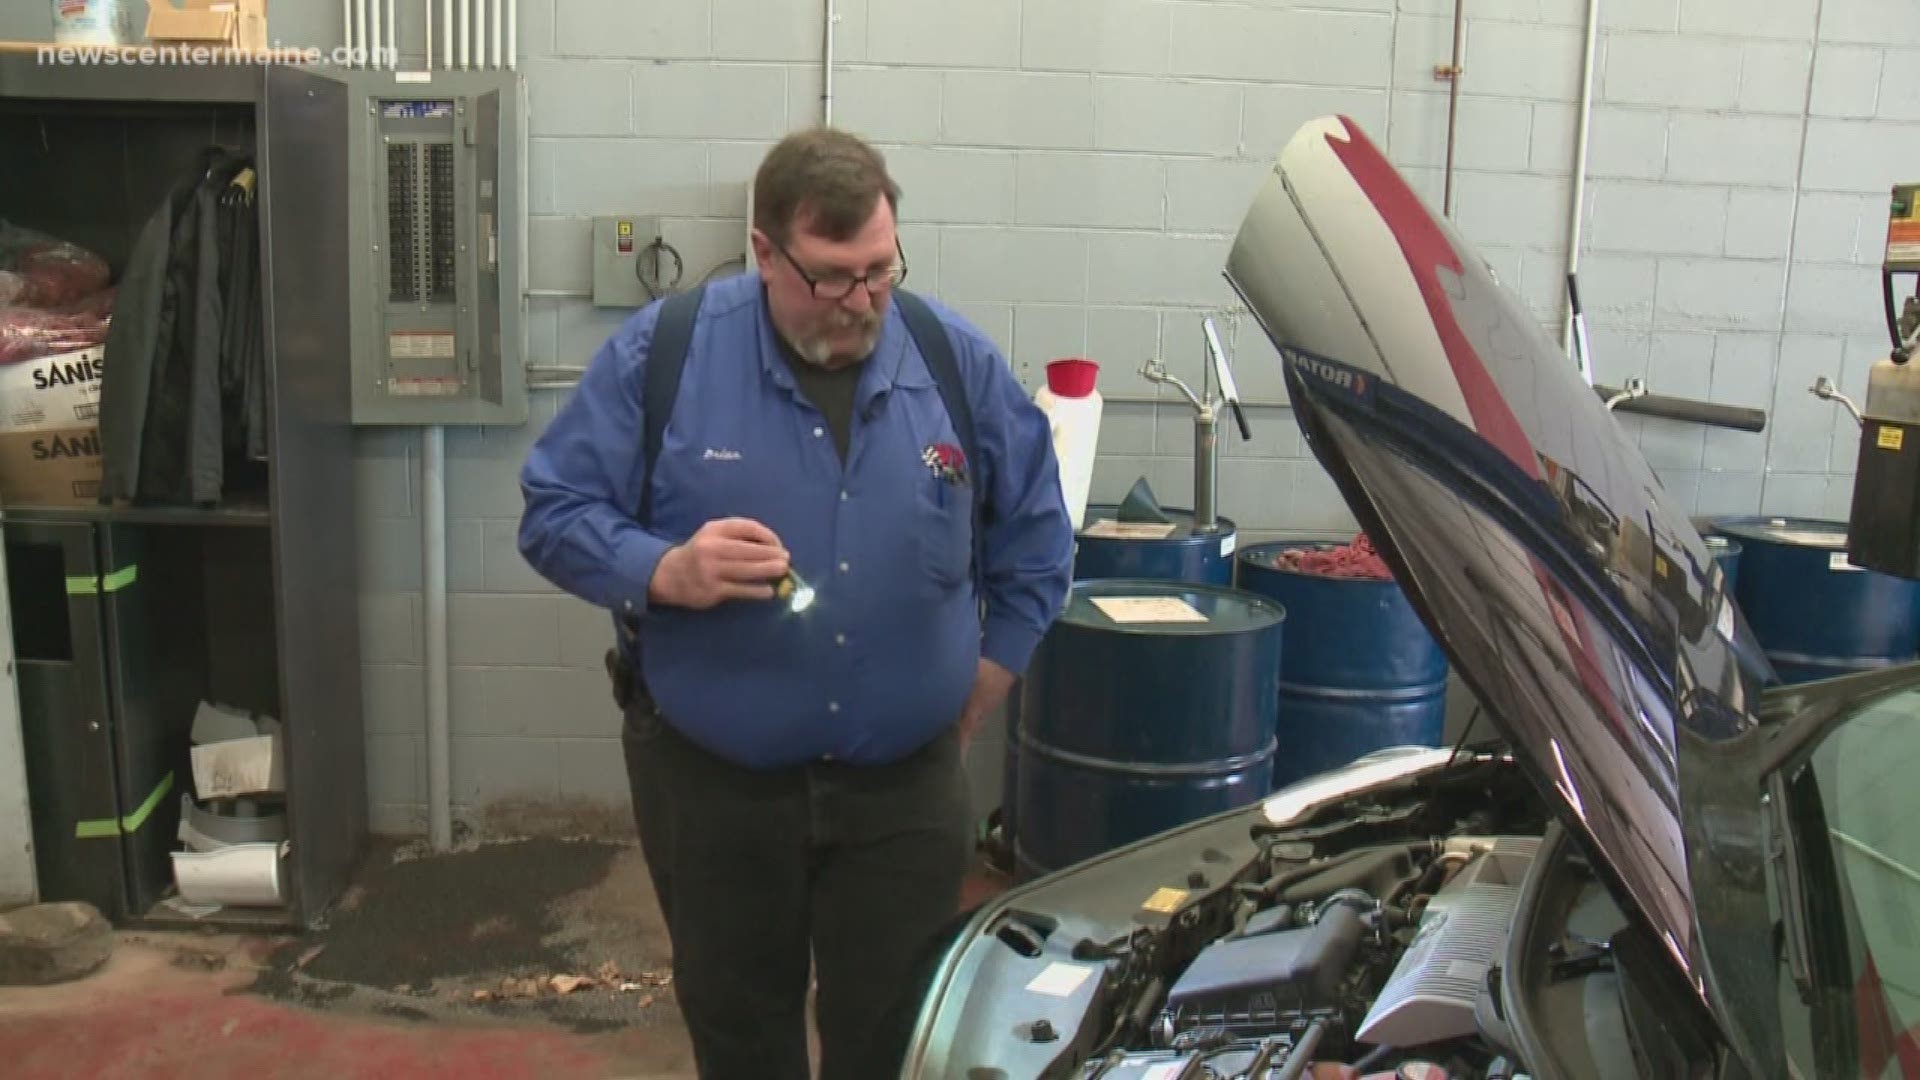 A Maine lawmaker is working to pass legislation that would require vehicle owners to get inspections only every two years.